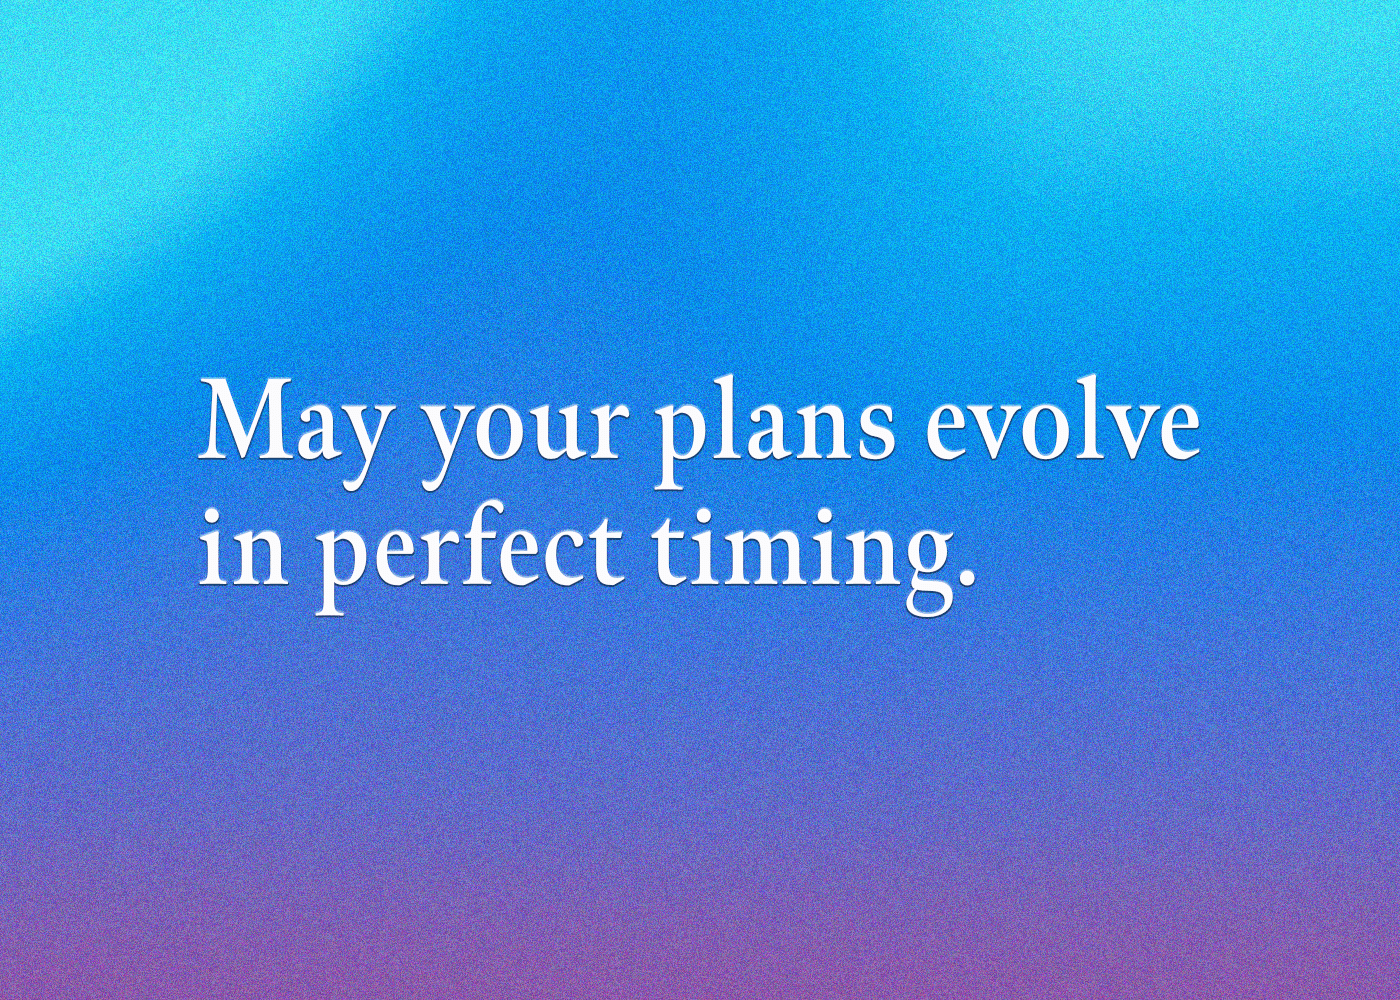 May your plans evolve in perfect timing